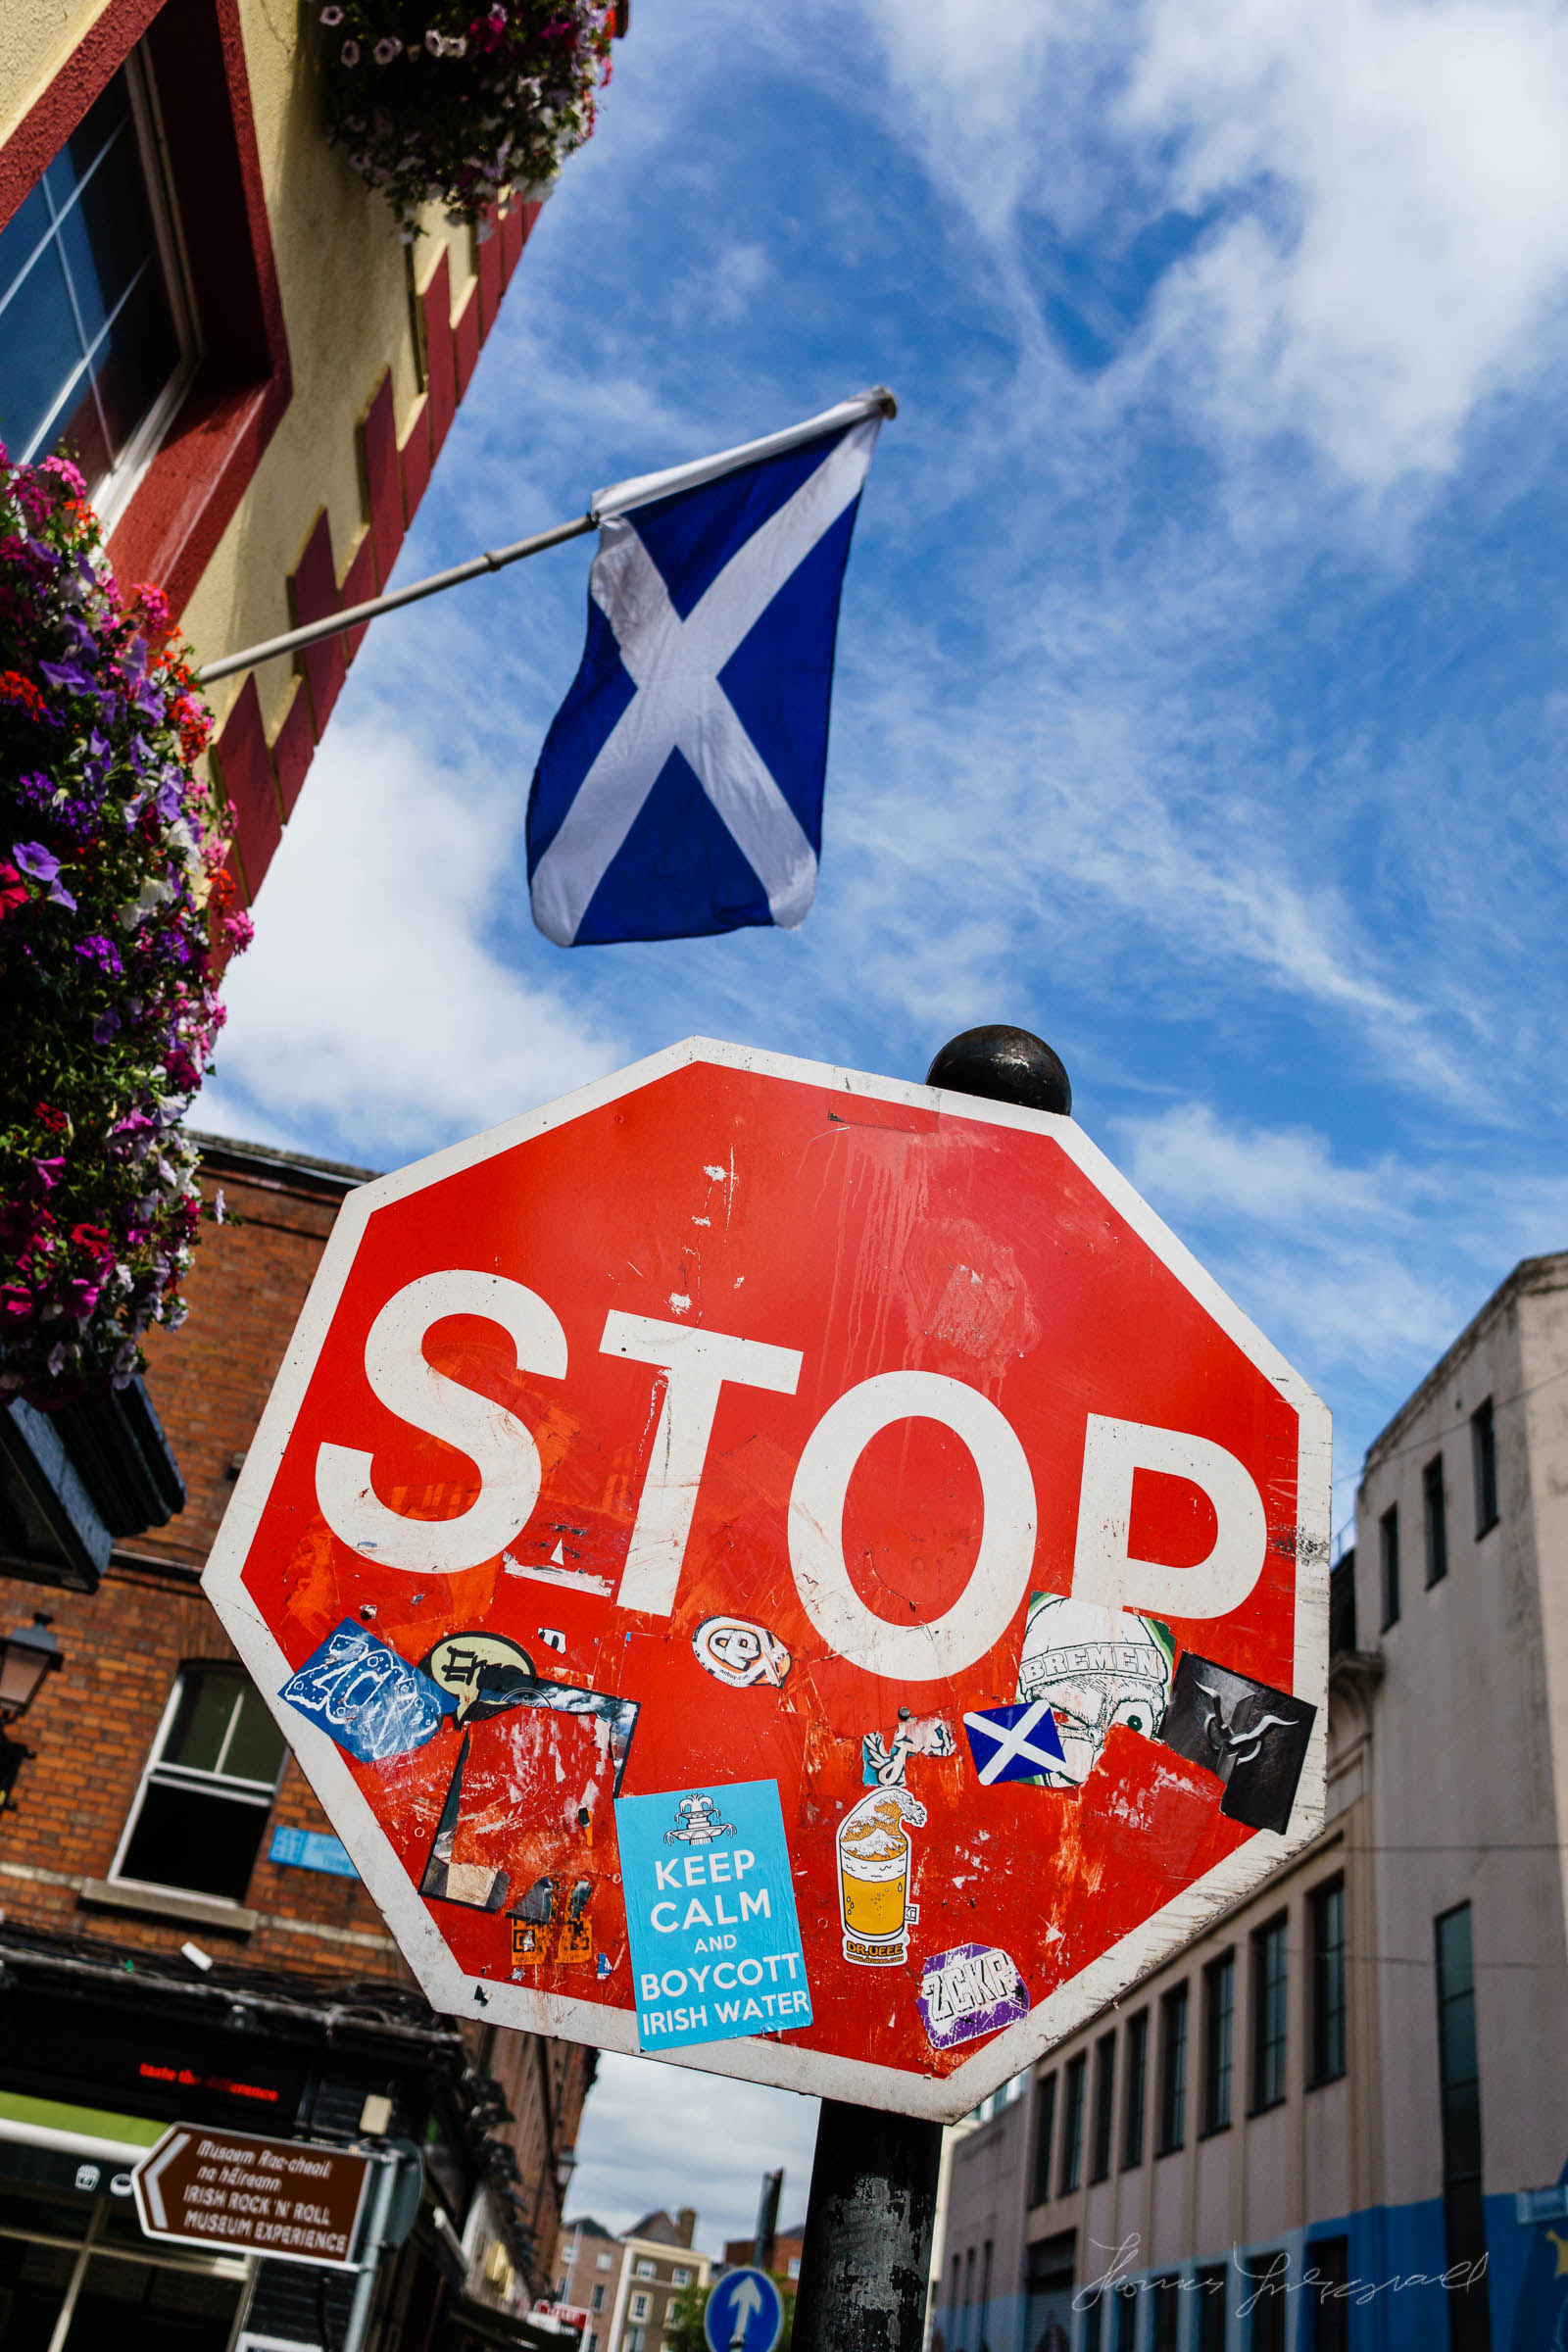 Street Sign in front of the Scottish Flag